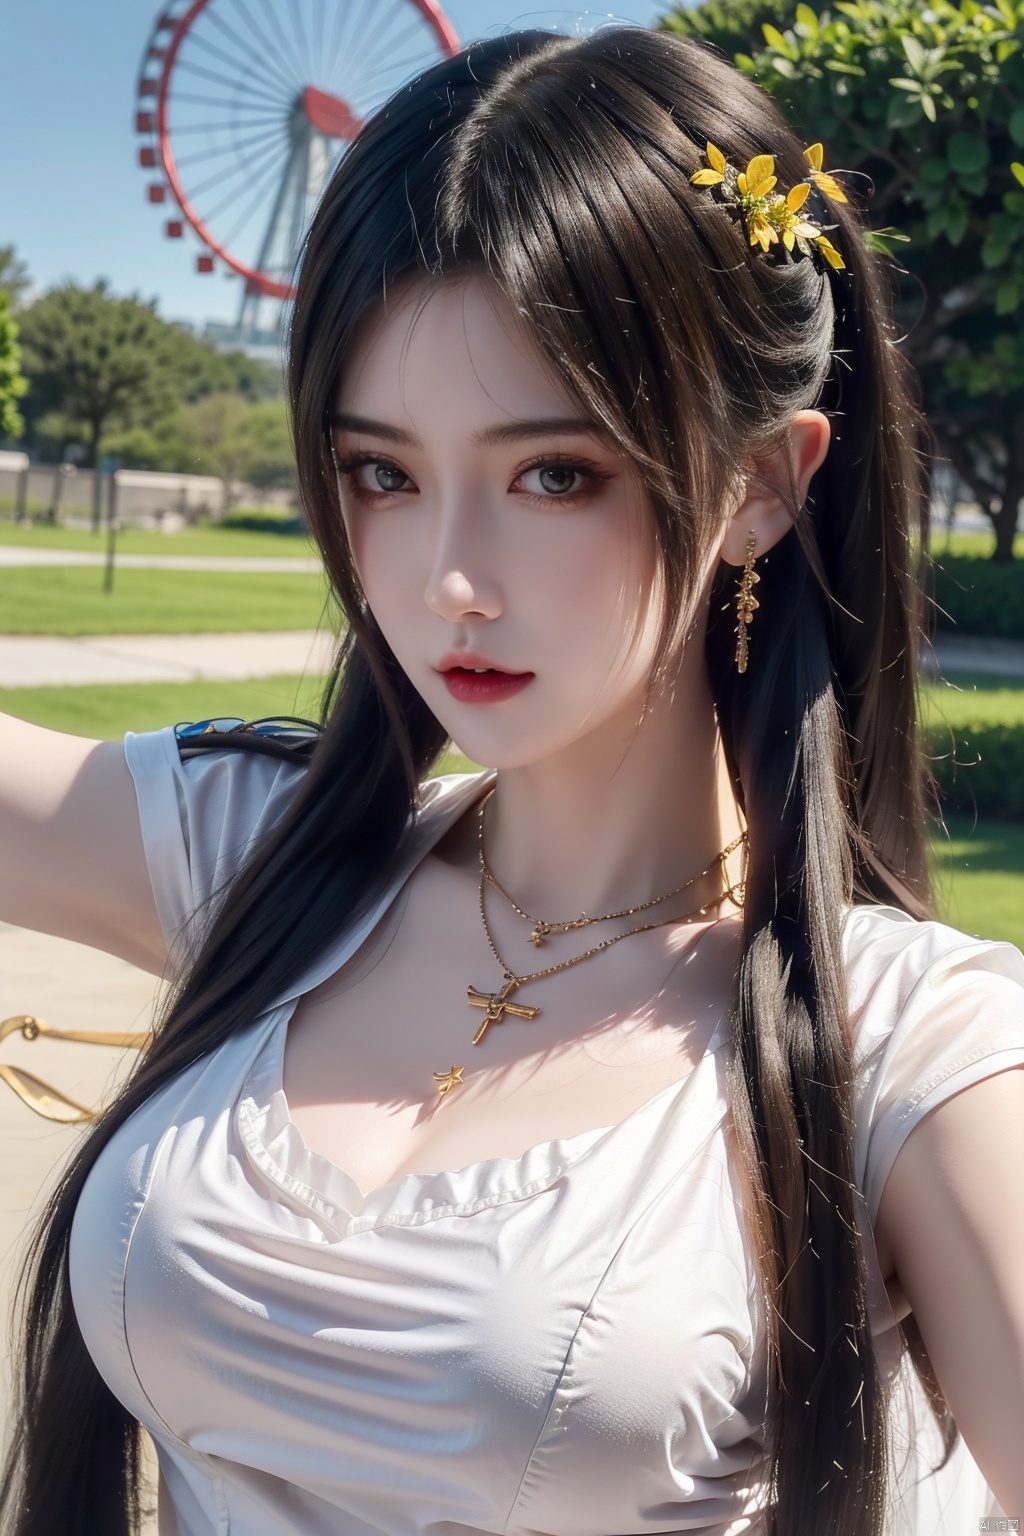  best quality, 1 beautiful Chinese girl,twintails, 
, big eyes,naked, snow-white skin, blue short sleeves, scissor hands, selfie mirror,

The sunshine, in the middle of the field, with the Ferris wheel in the distance,(big breasts:1.3)